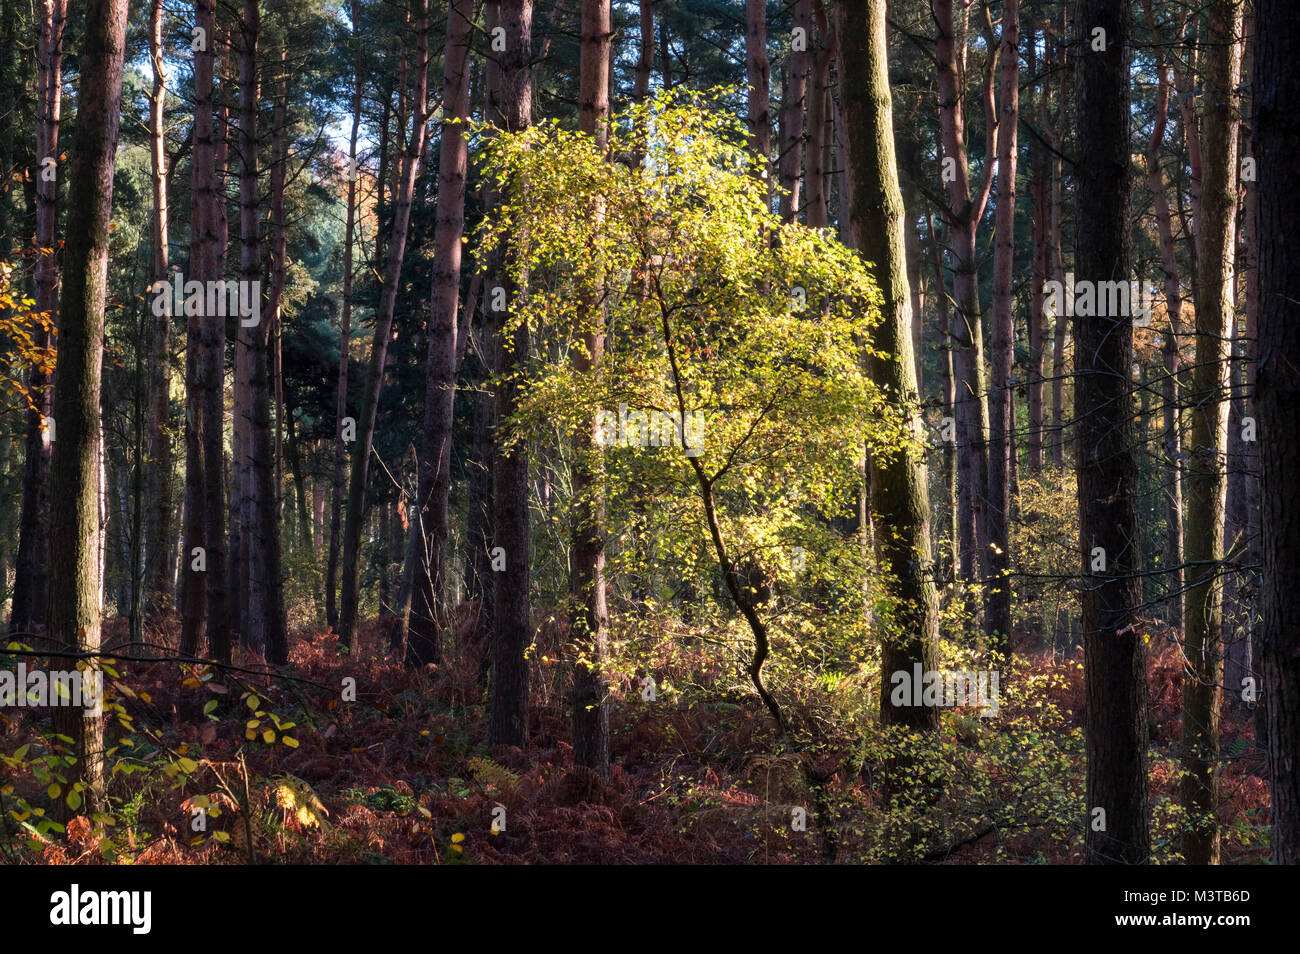 Forest Light, Beech Tree Sapling in autumn, Delamere Forest, Delamere, Cheshire, England, UK Stock Photo